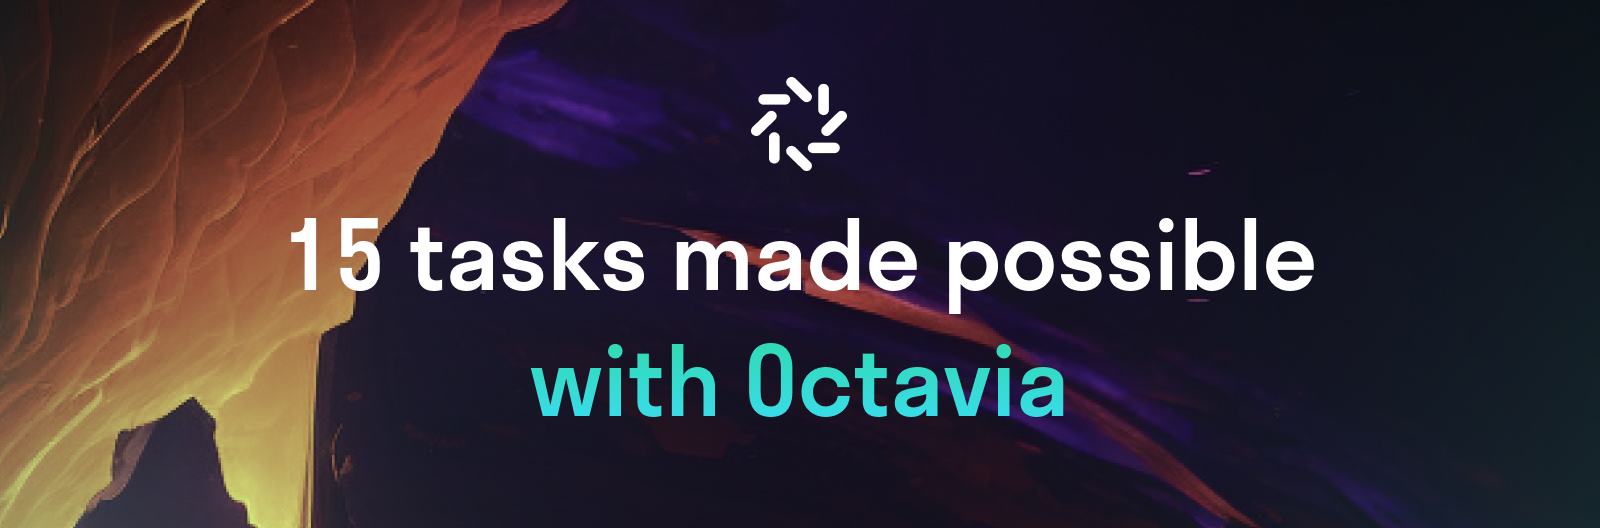 15 Tasks made possible with Octavia